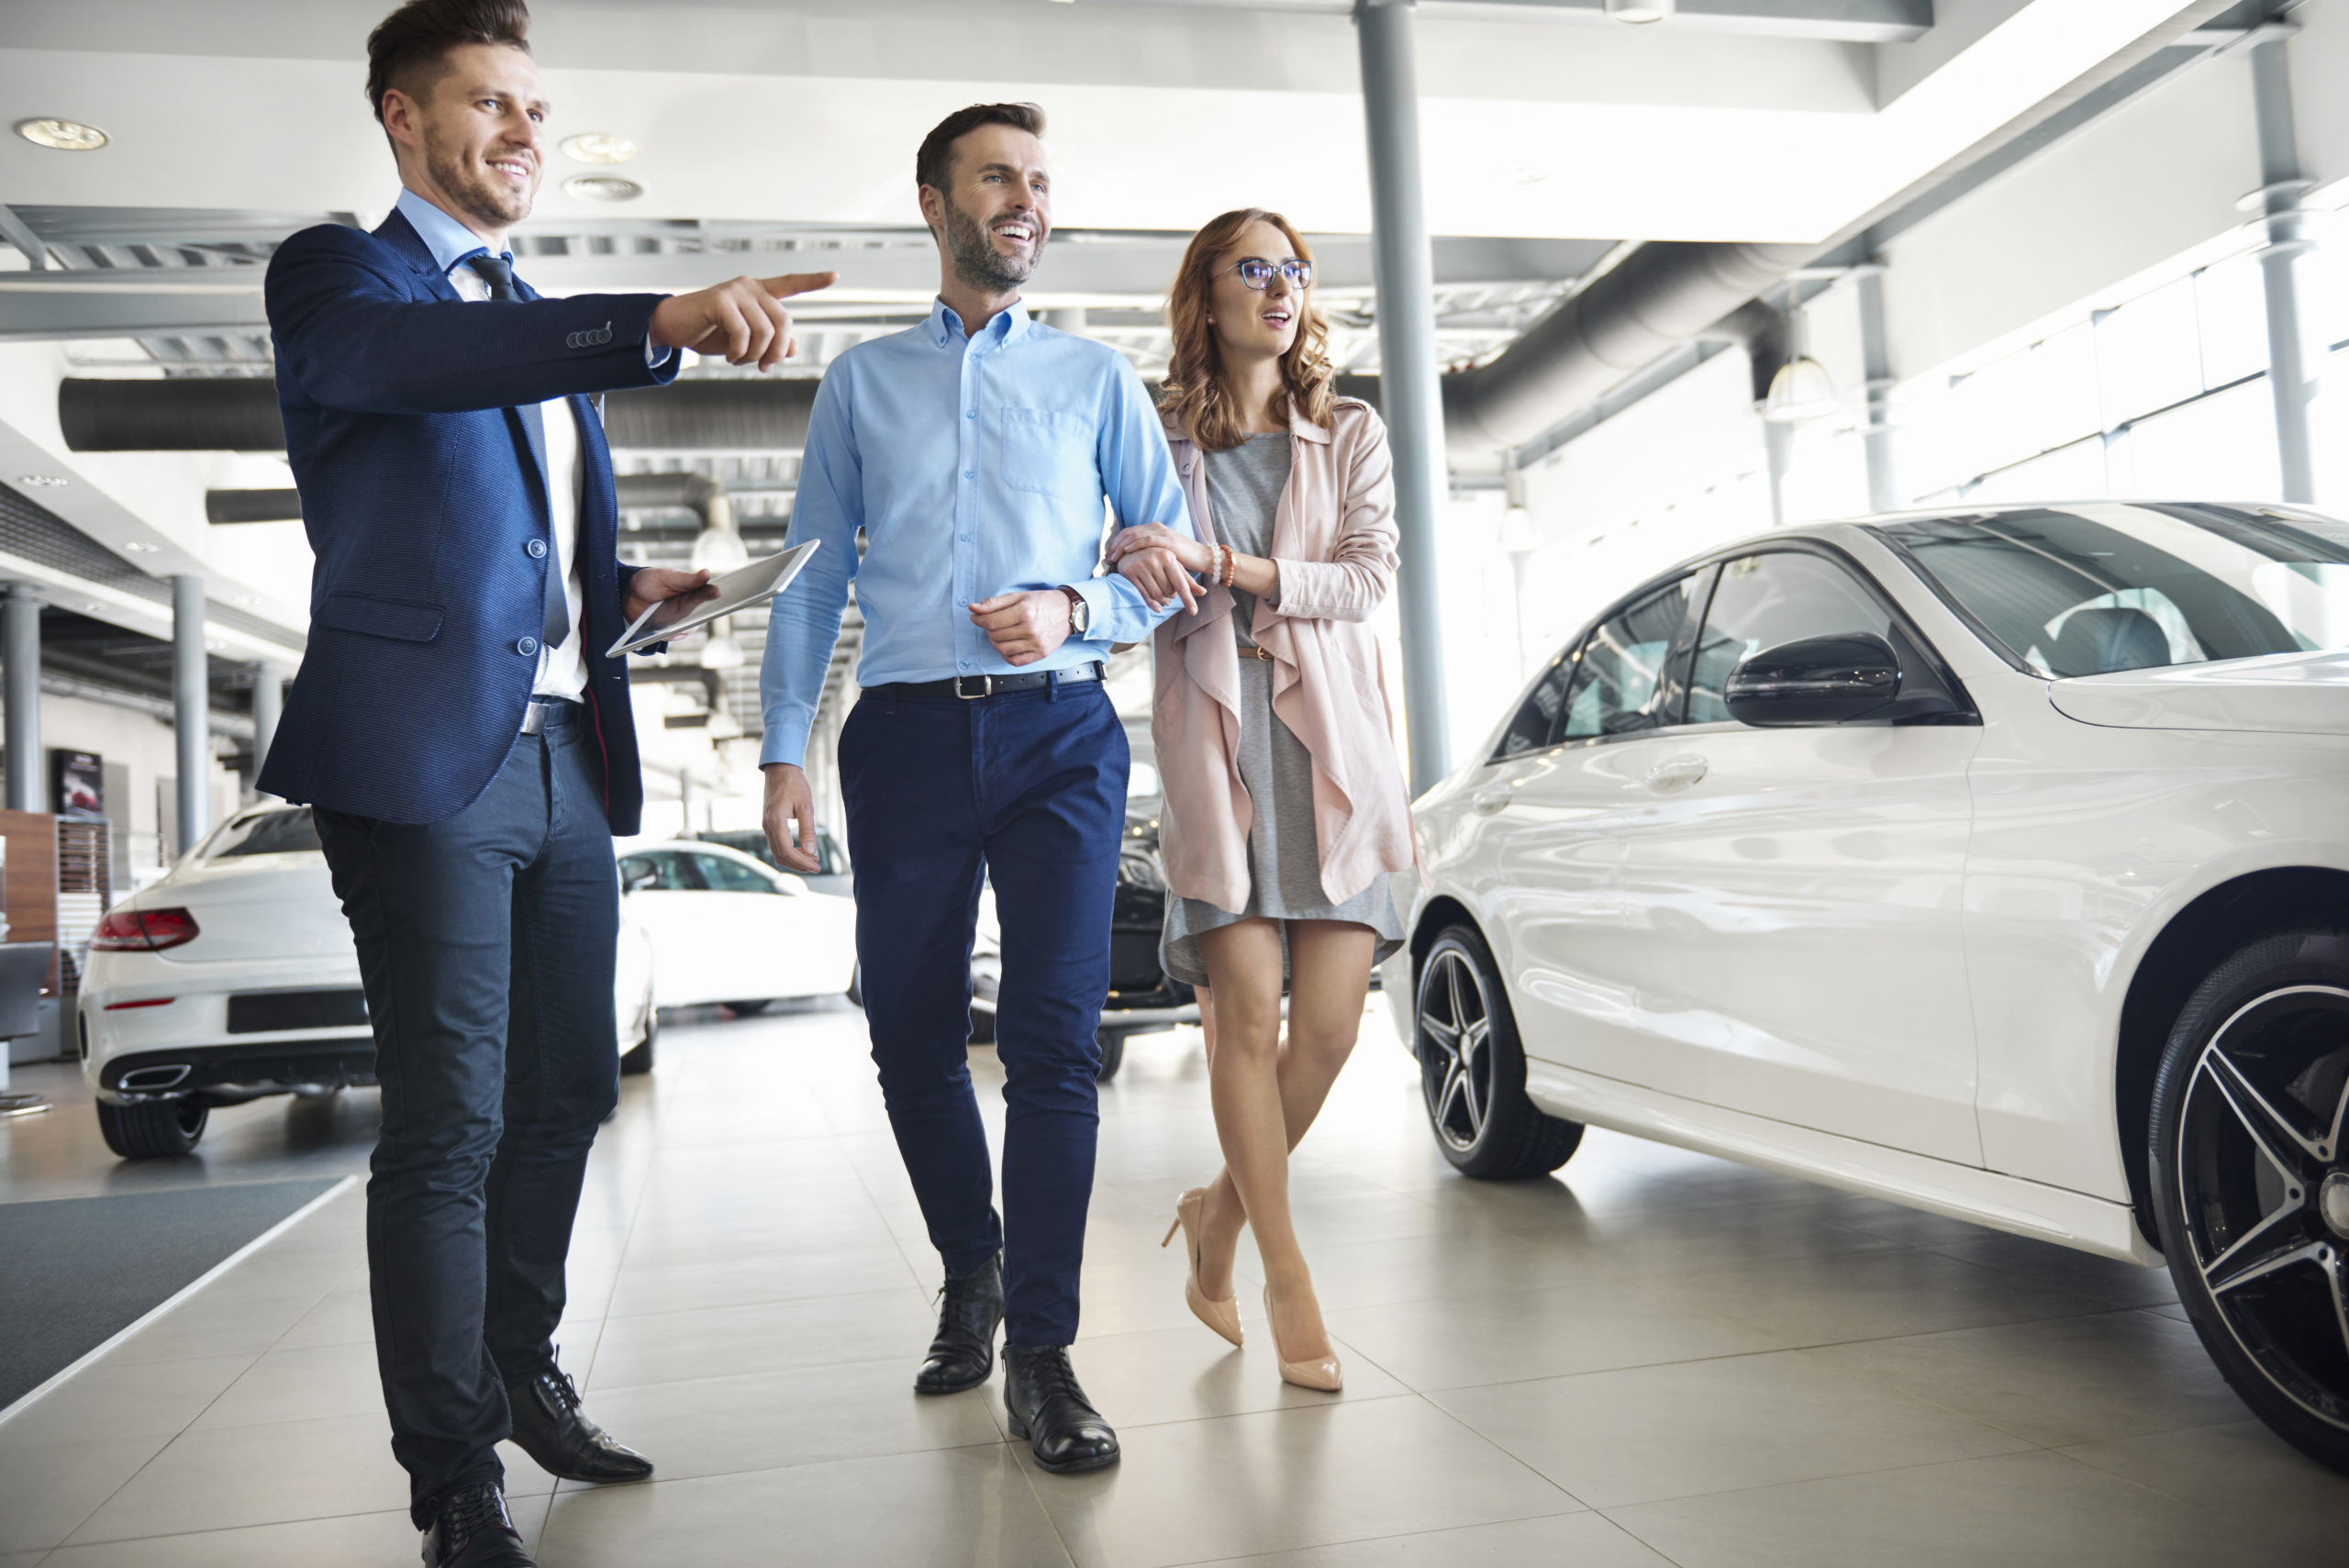 The Autopeople Report | June 2022 Updates - Autopeople Automotive Recruiting